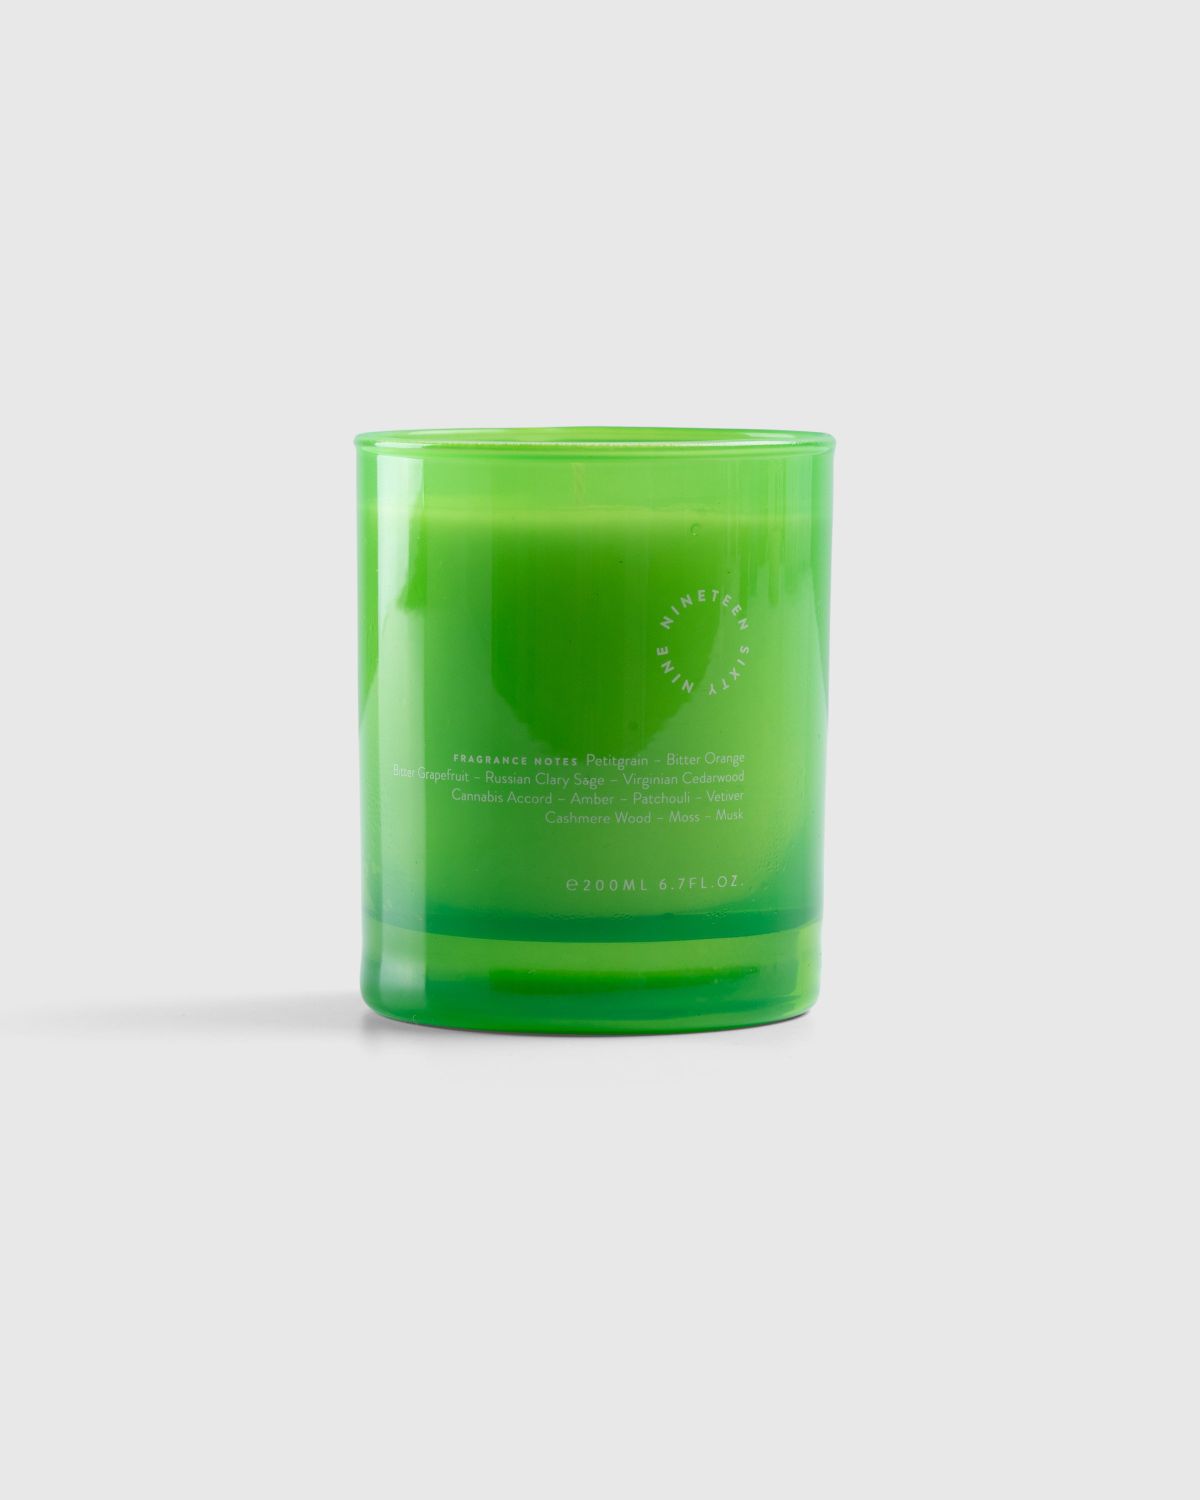 19-69 – Chronic BP Candle - Candles & Fragrances - Green - Image 2